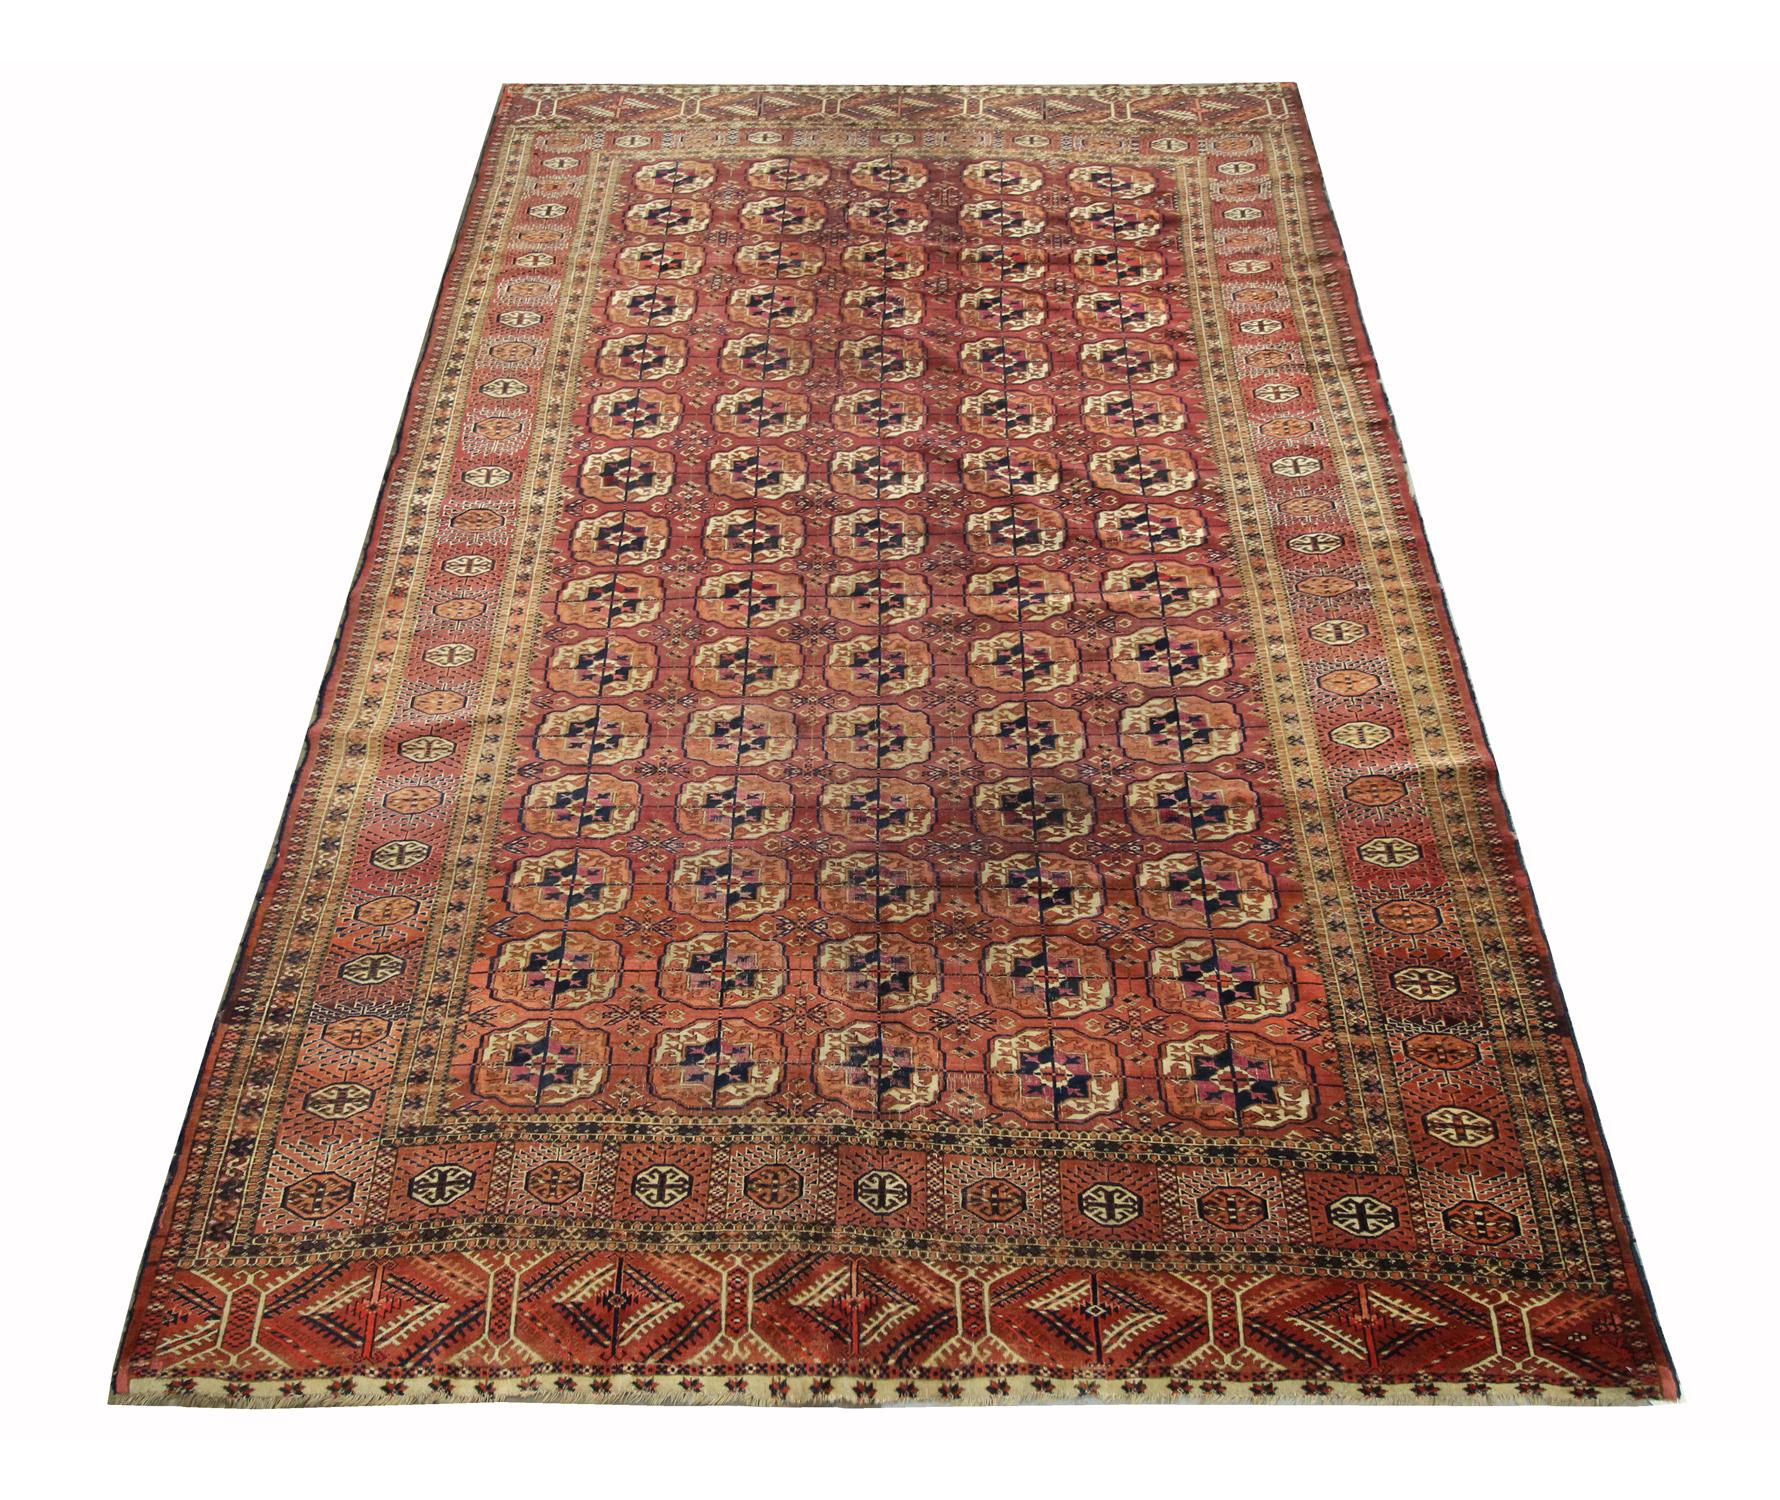 This fine wool is an Indian wool rug that was woven by hand in the 1930s. It features a traditional medallion design with a rich orange background that has been decorated with a delicate medallion and symmetrical surrounding design and border.